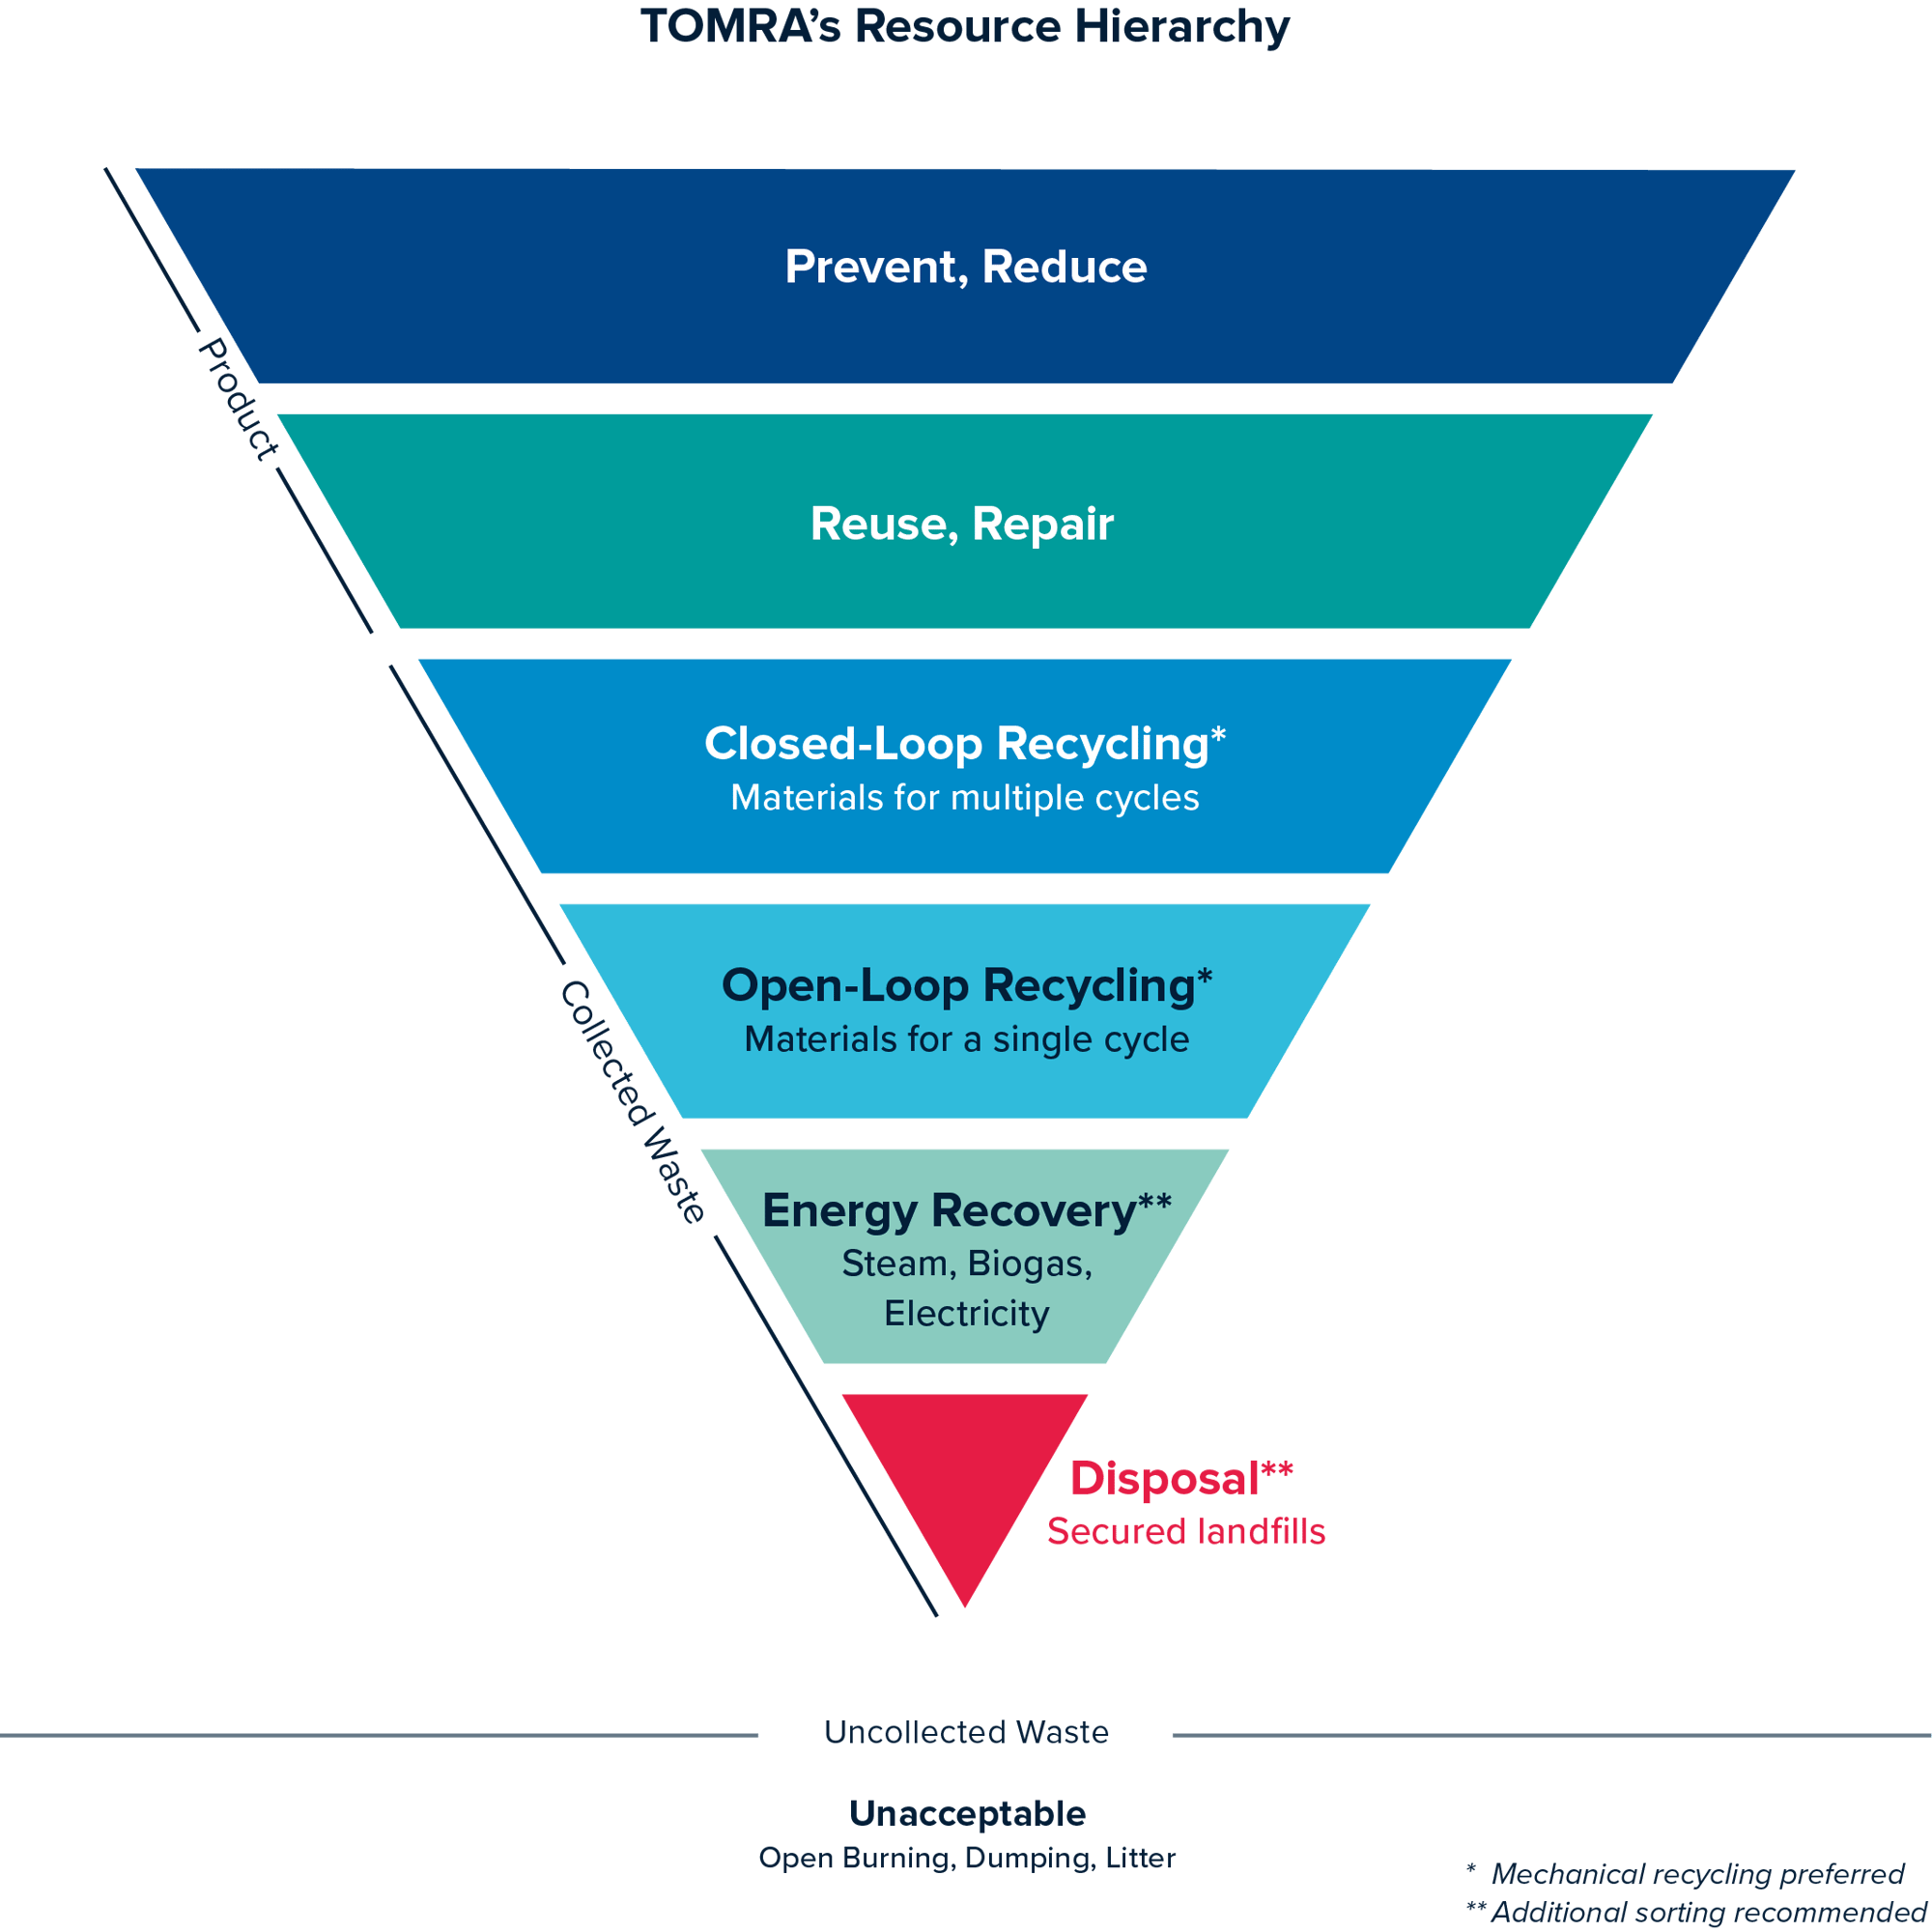 20230622_Infographic_TOMRAs resource hierarchy_with headline 